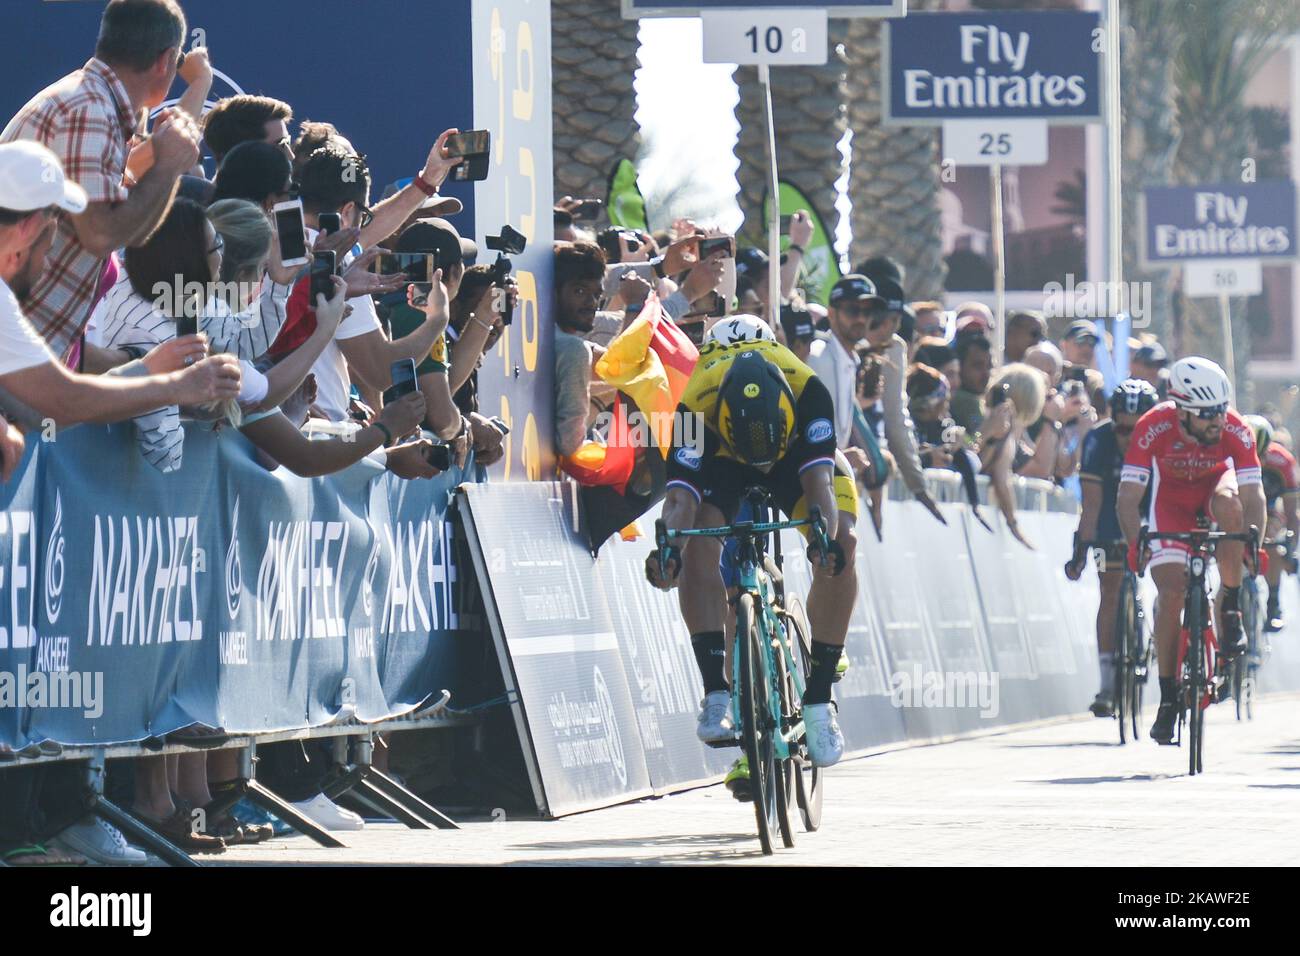 Dutch Dylan GROENEWEGEN from Team LottoNL–Jumbo wins the Nakheel Stage, 167 km opening stage of Tour of Dubai 2018, with a start from Skydive Dubai and finish in front of the Atlantis at Palm Jumeirah. On Tuesday, February 6, 2018, in Dubai, United Arab Emirates. (Photo by Artur Widak/NurPhoto) Stock Photo